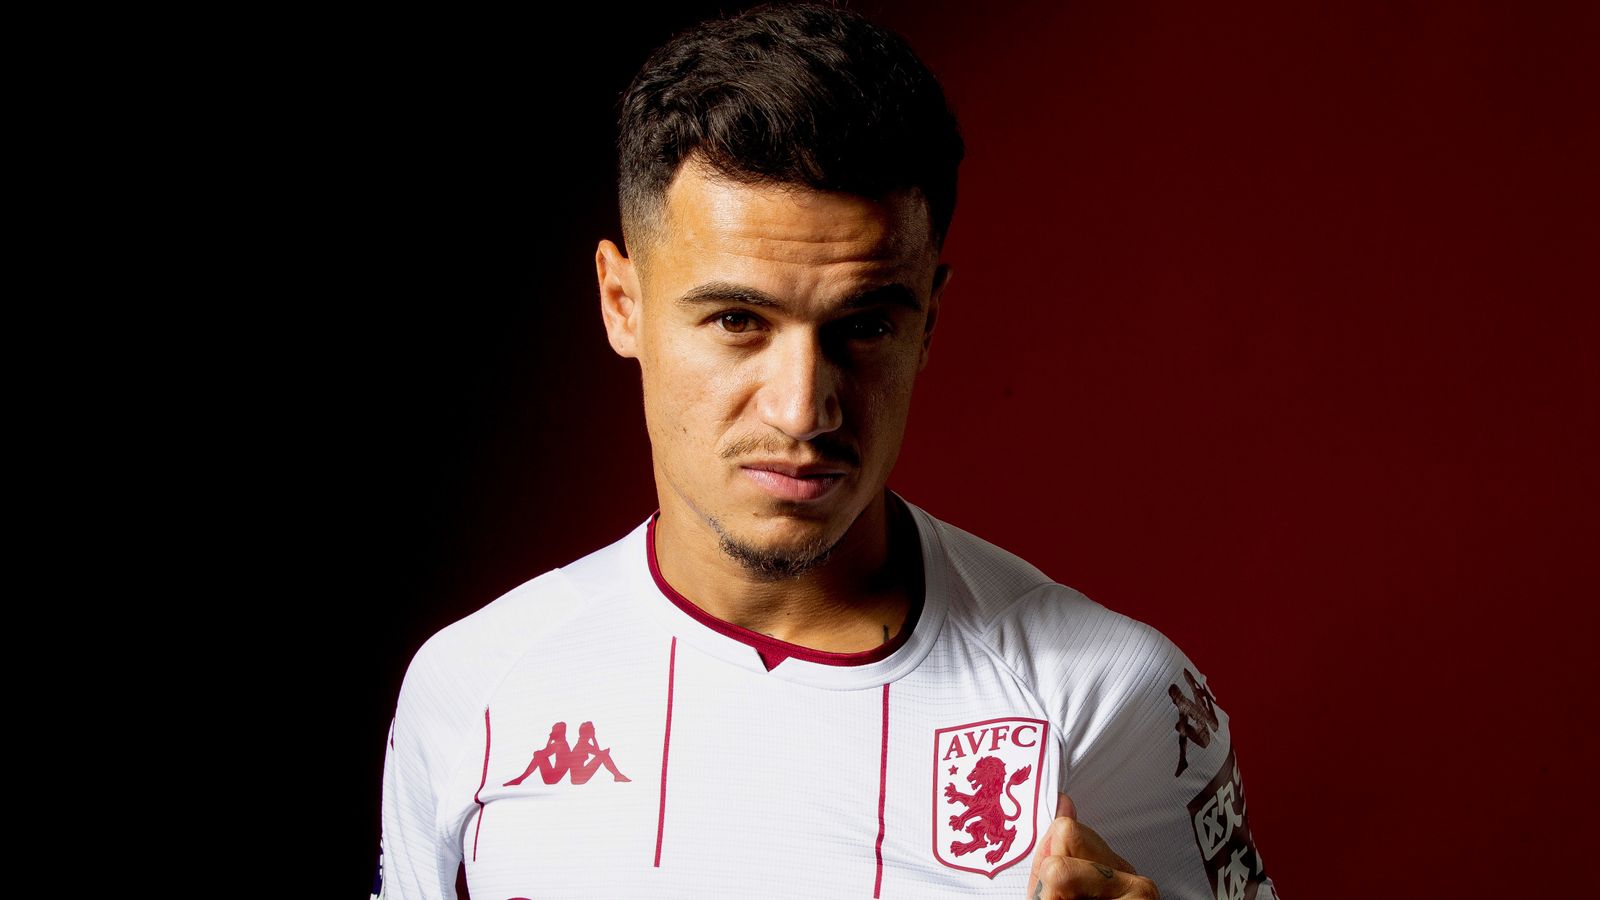 Philippe Coutinho available for Aston Villa to play Man Utd, but Steven Gerrard won't rush new signing